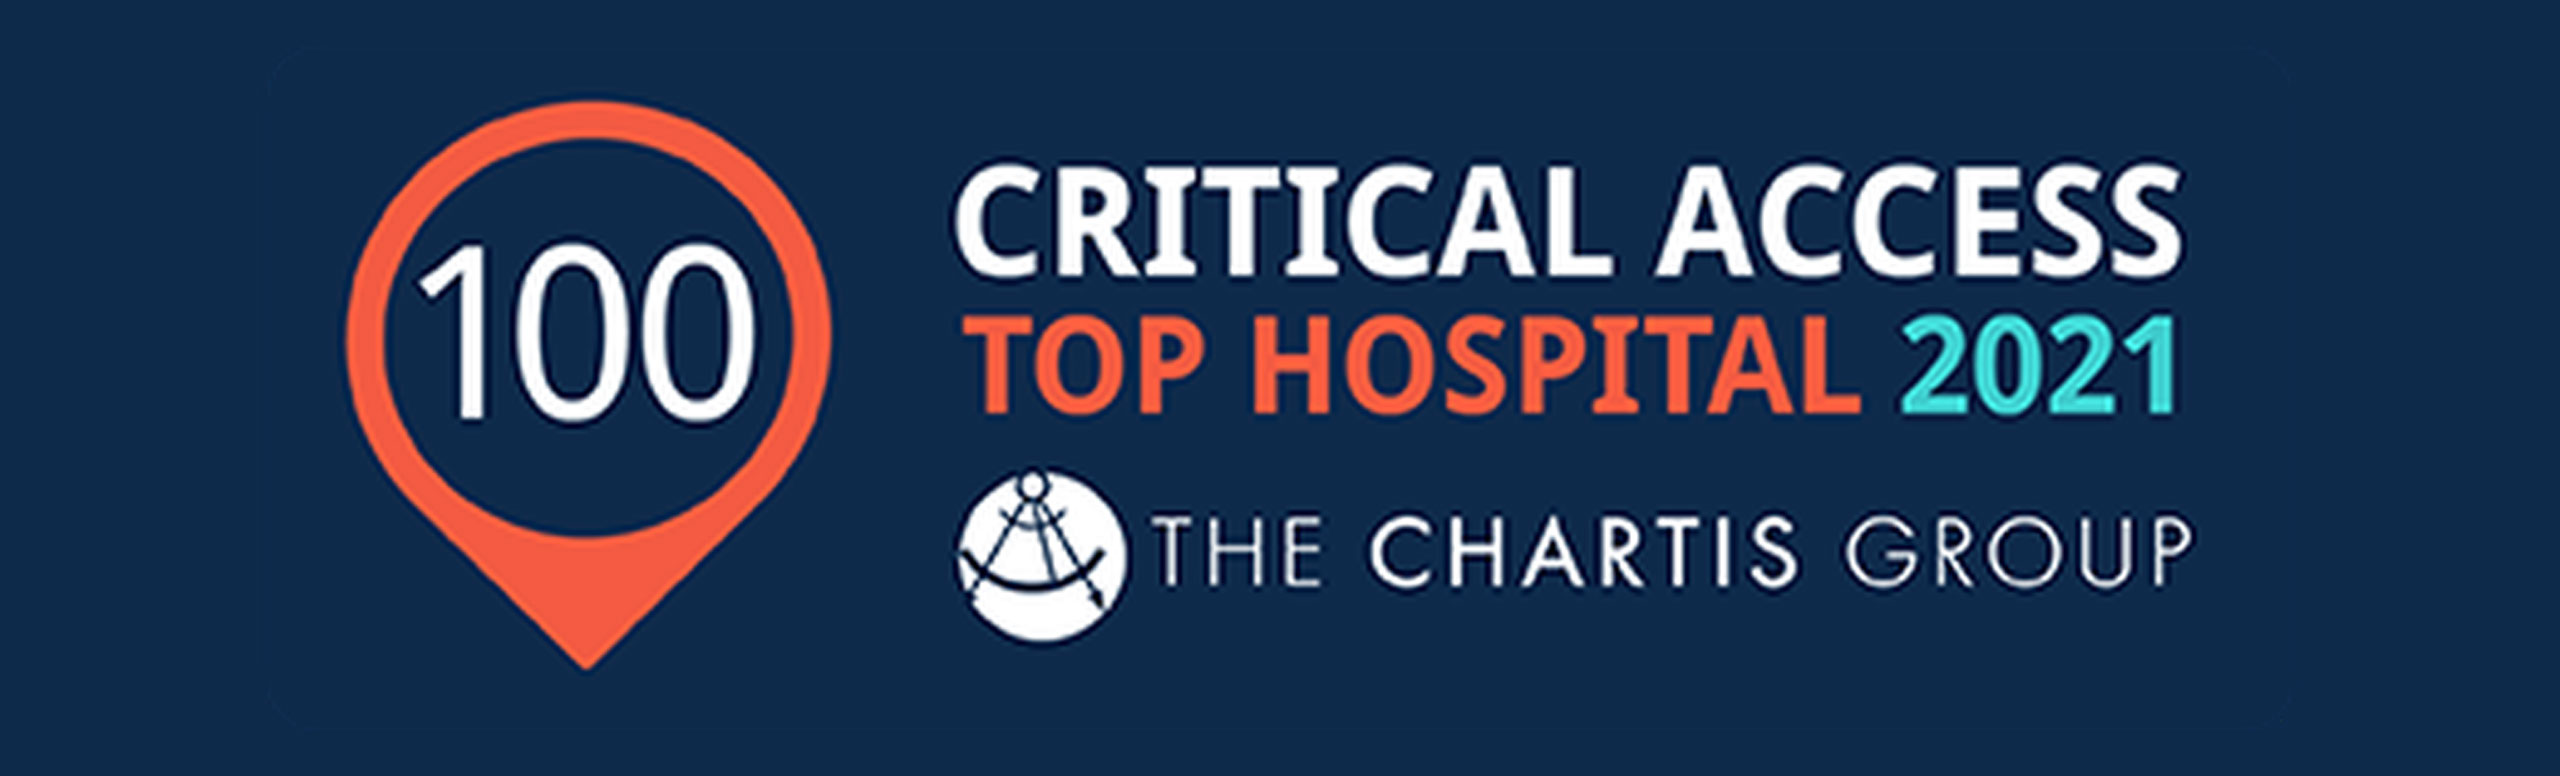 100
CRITICAL ACCESS
TOP HOSPITAL 2021
(Icon) THE CHARTIS GROUP